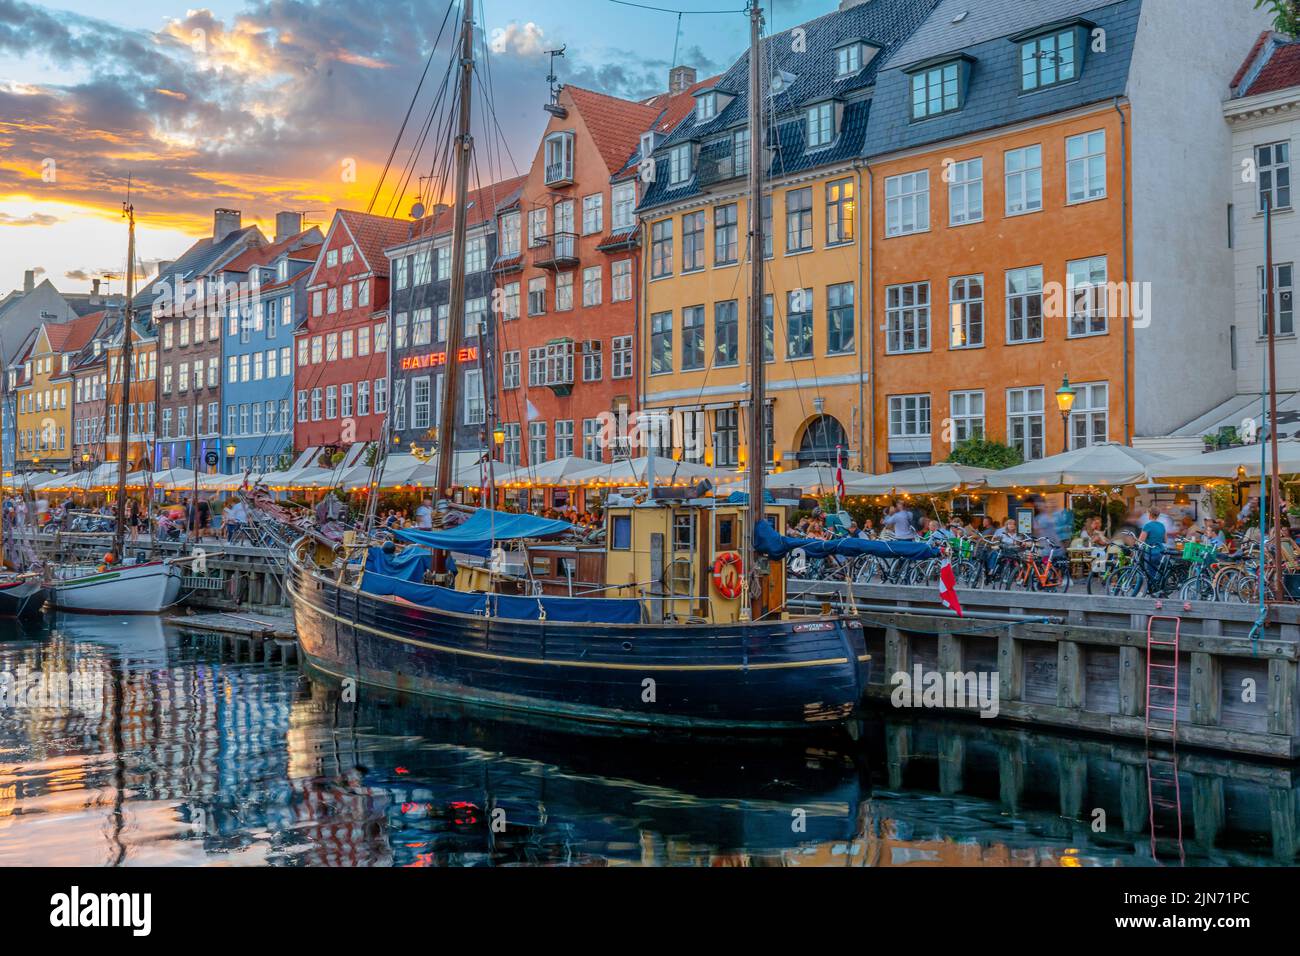 A beautiful shot of a famous tourist spot Nyhavn in Copenhagen with colorful buildings and boats Stock Photo